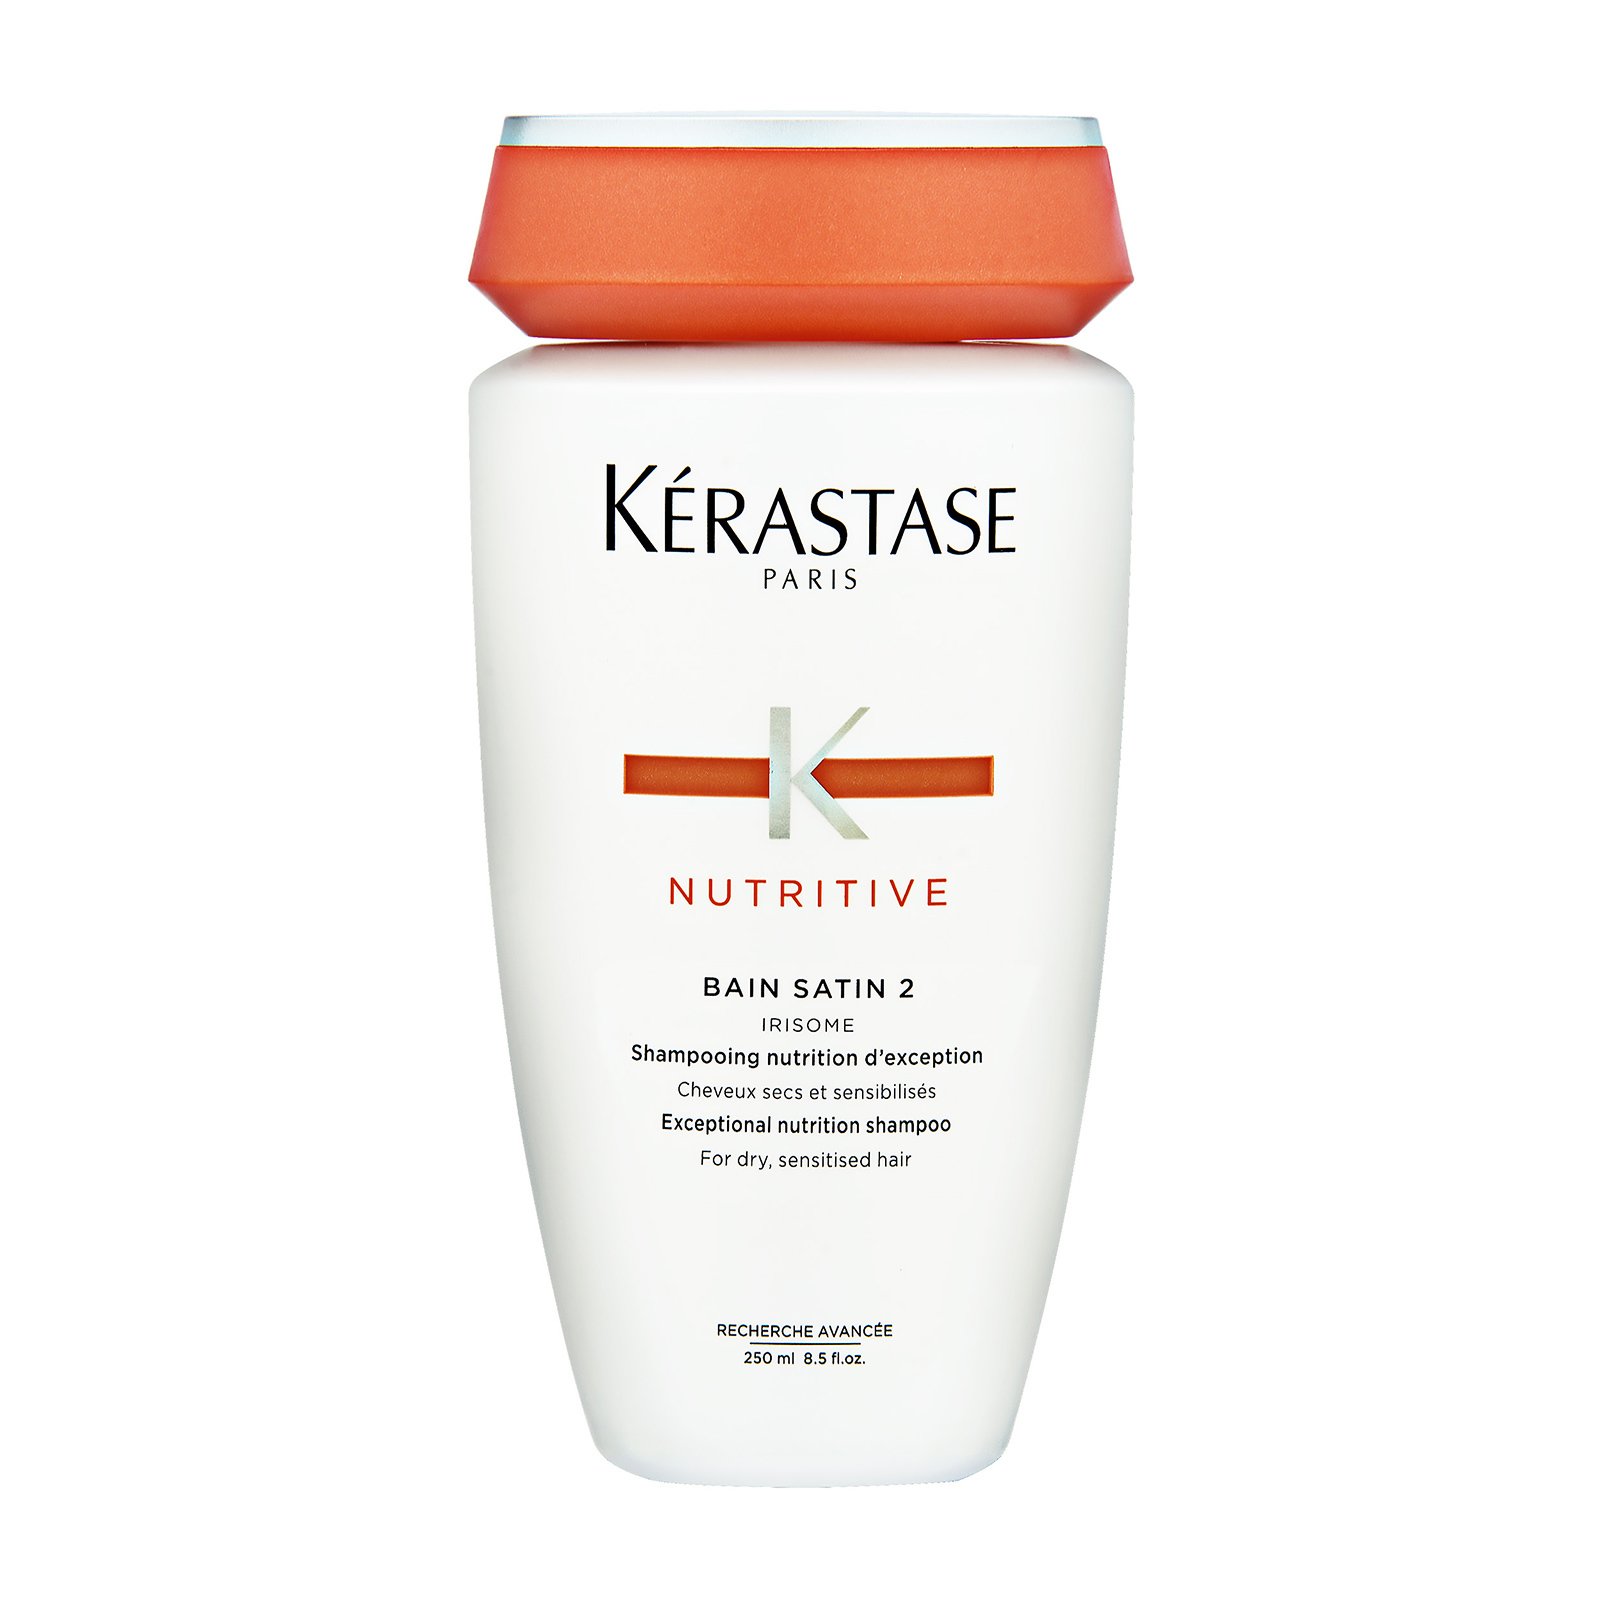 Nutritive Bain Satin 2 Irisome Exceptional Nutrition Shampoo (For Dry to Sensitised Hair)